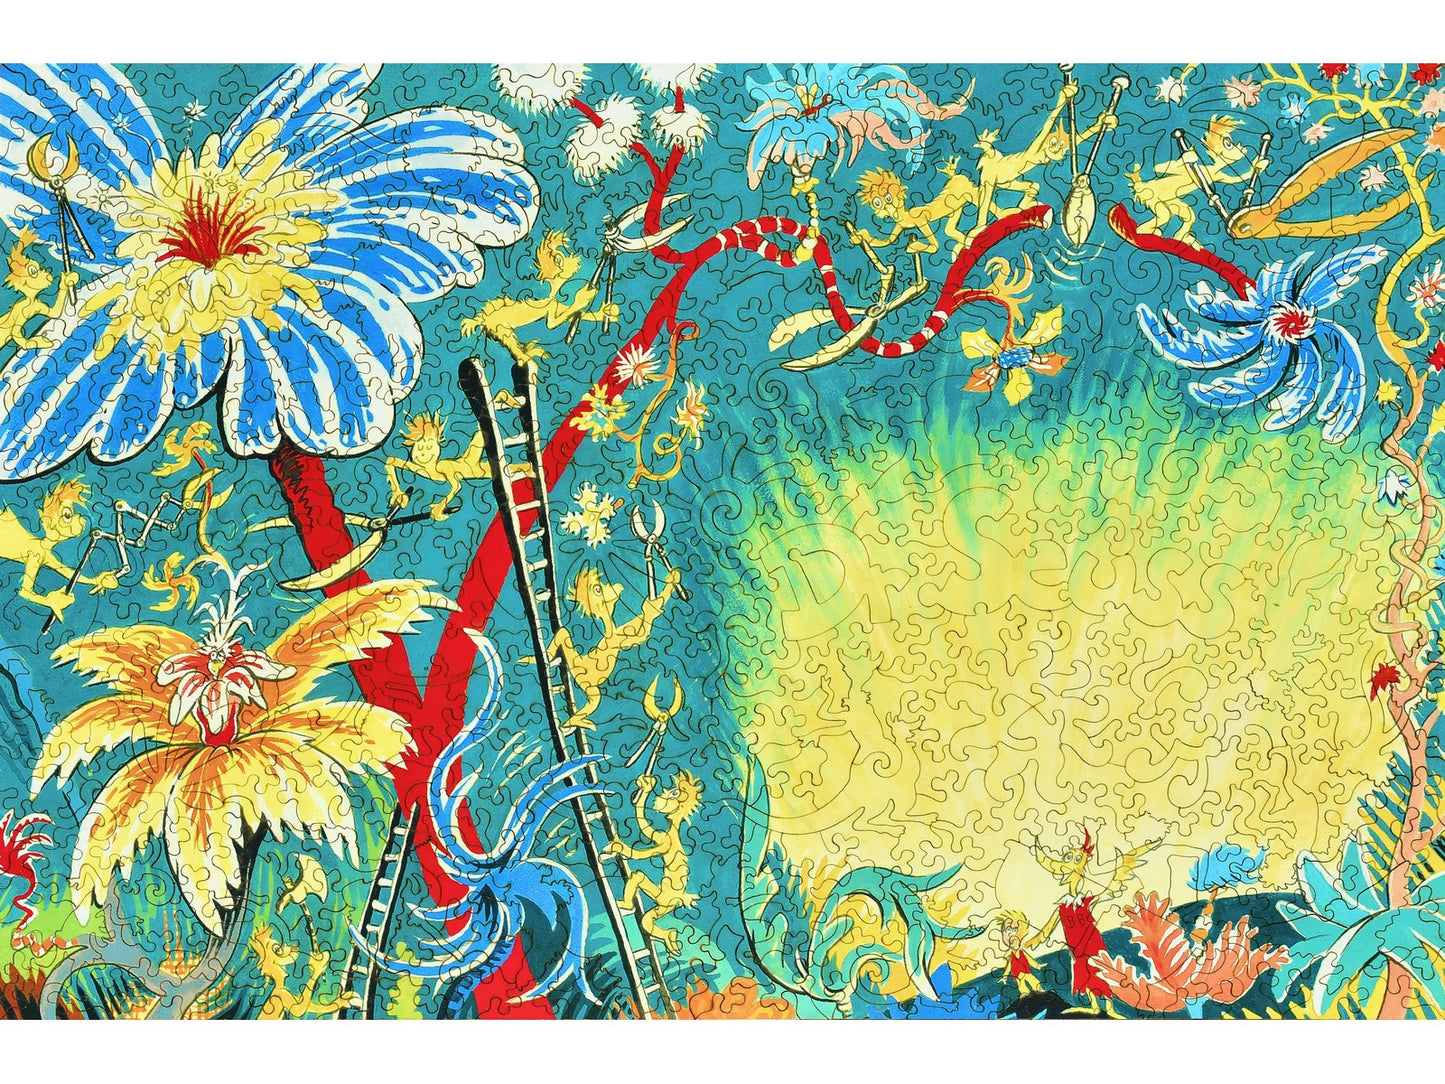 The front of the puzzle, A Plethora of Flowers, which shows little creatures trimming flowering vines.